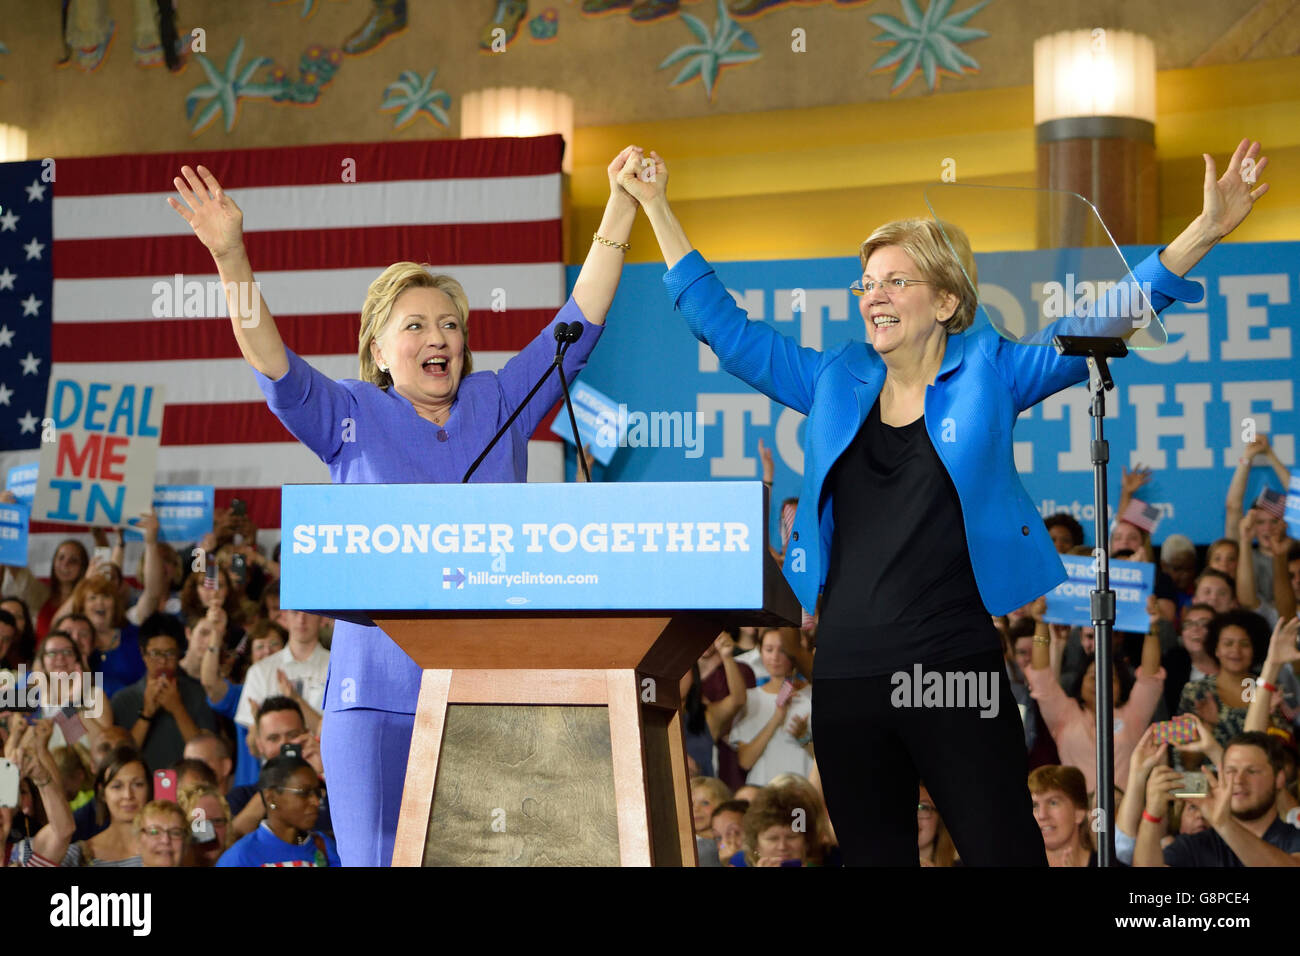 Hillary Clinton and Elizabeth Warren stand on stage holding hands up at a campaign rally in Cincinnati Ohio on June 27, 2016. Stock Photo